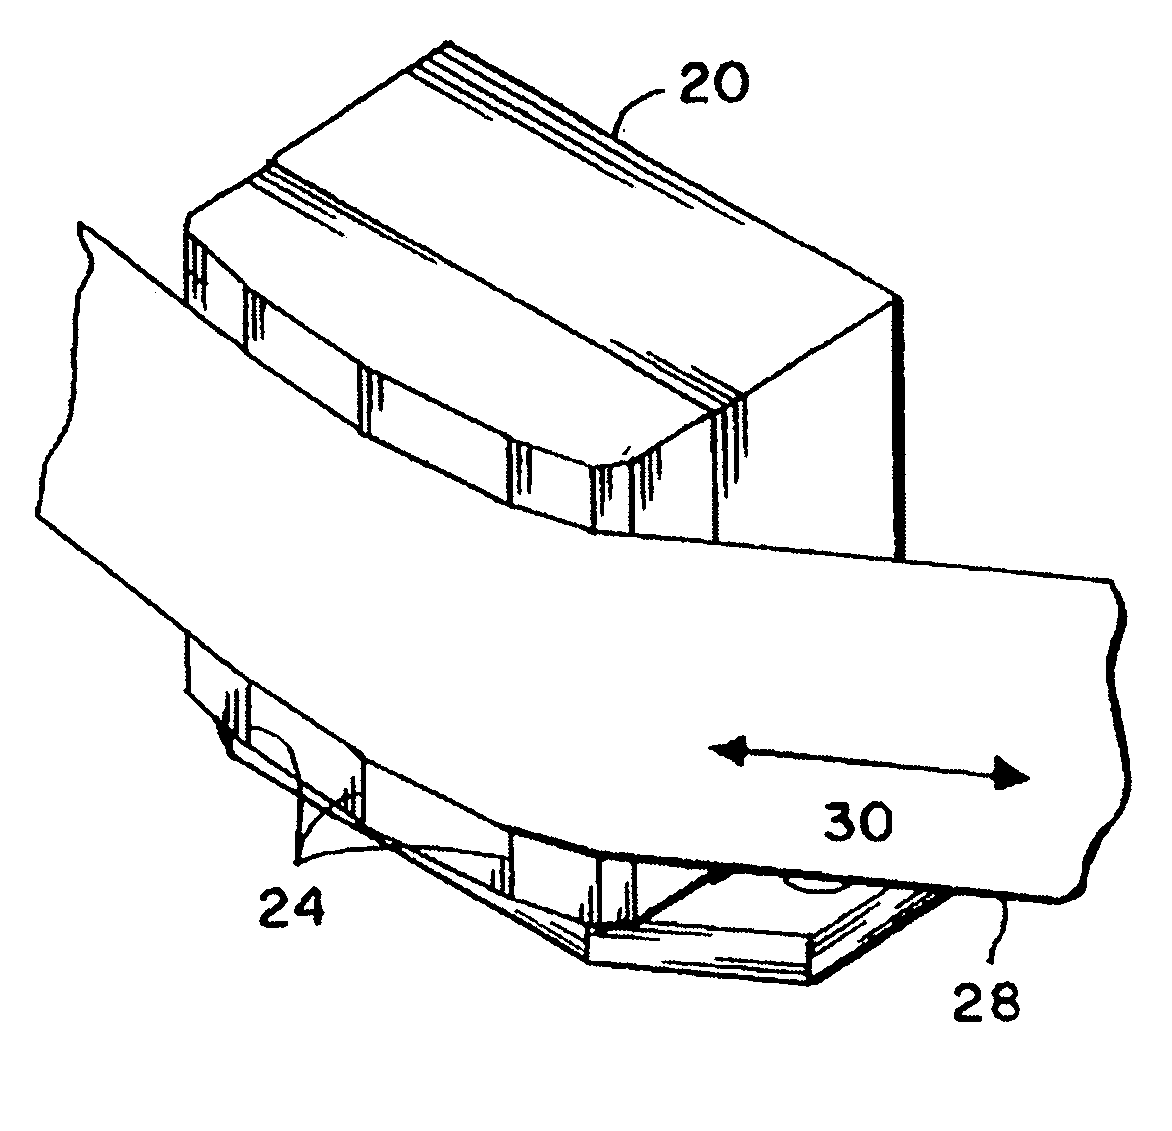 Read/write head having varying wear regions and methods of manufacture